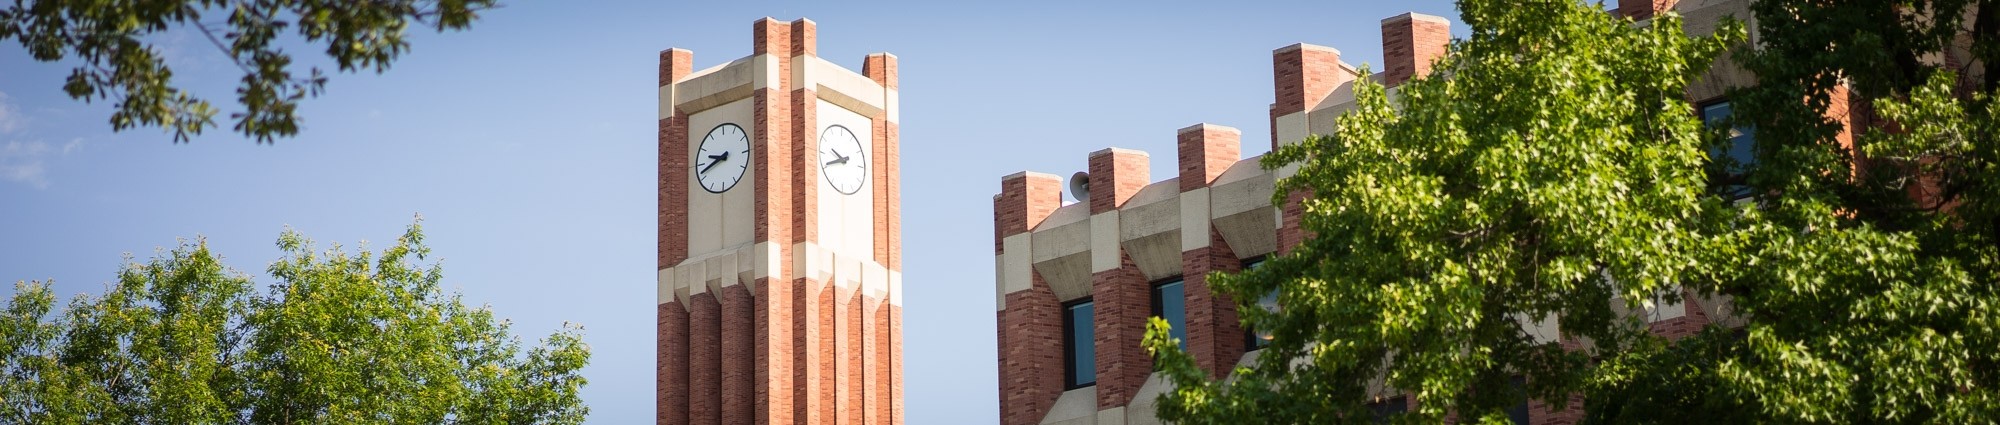 The clocktower outside of Bizzell Memorial Library on the University of Oklahoma campus in Norman.